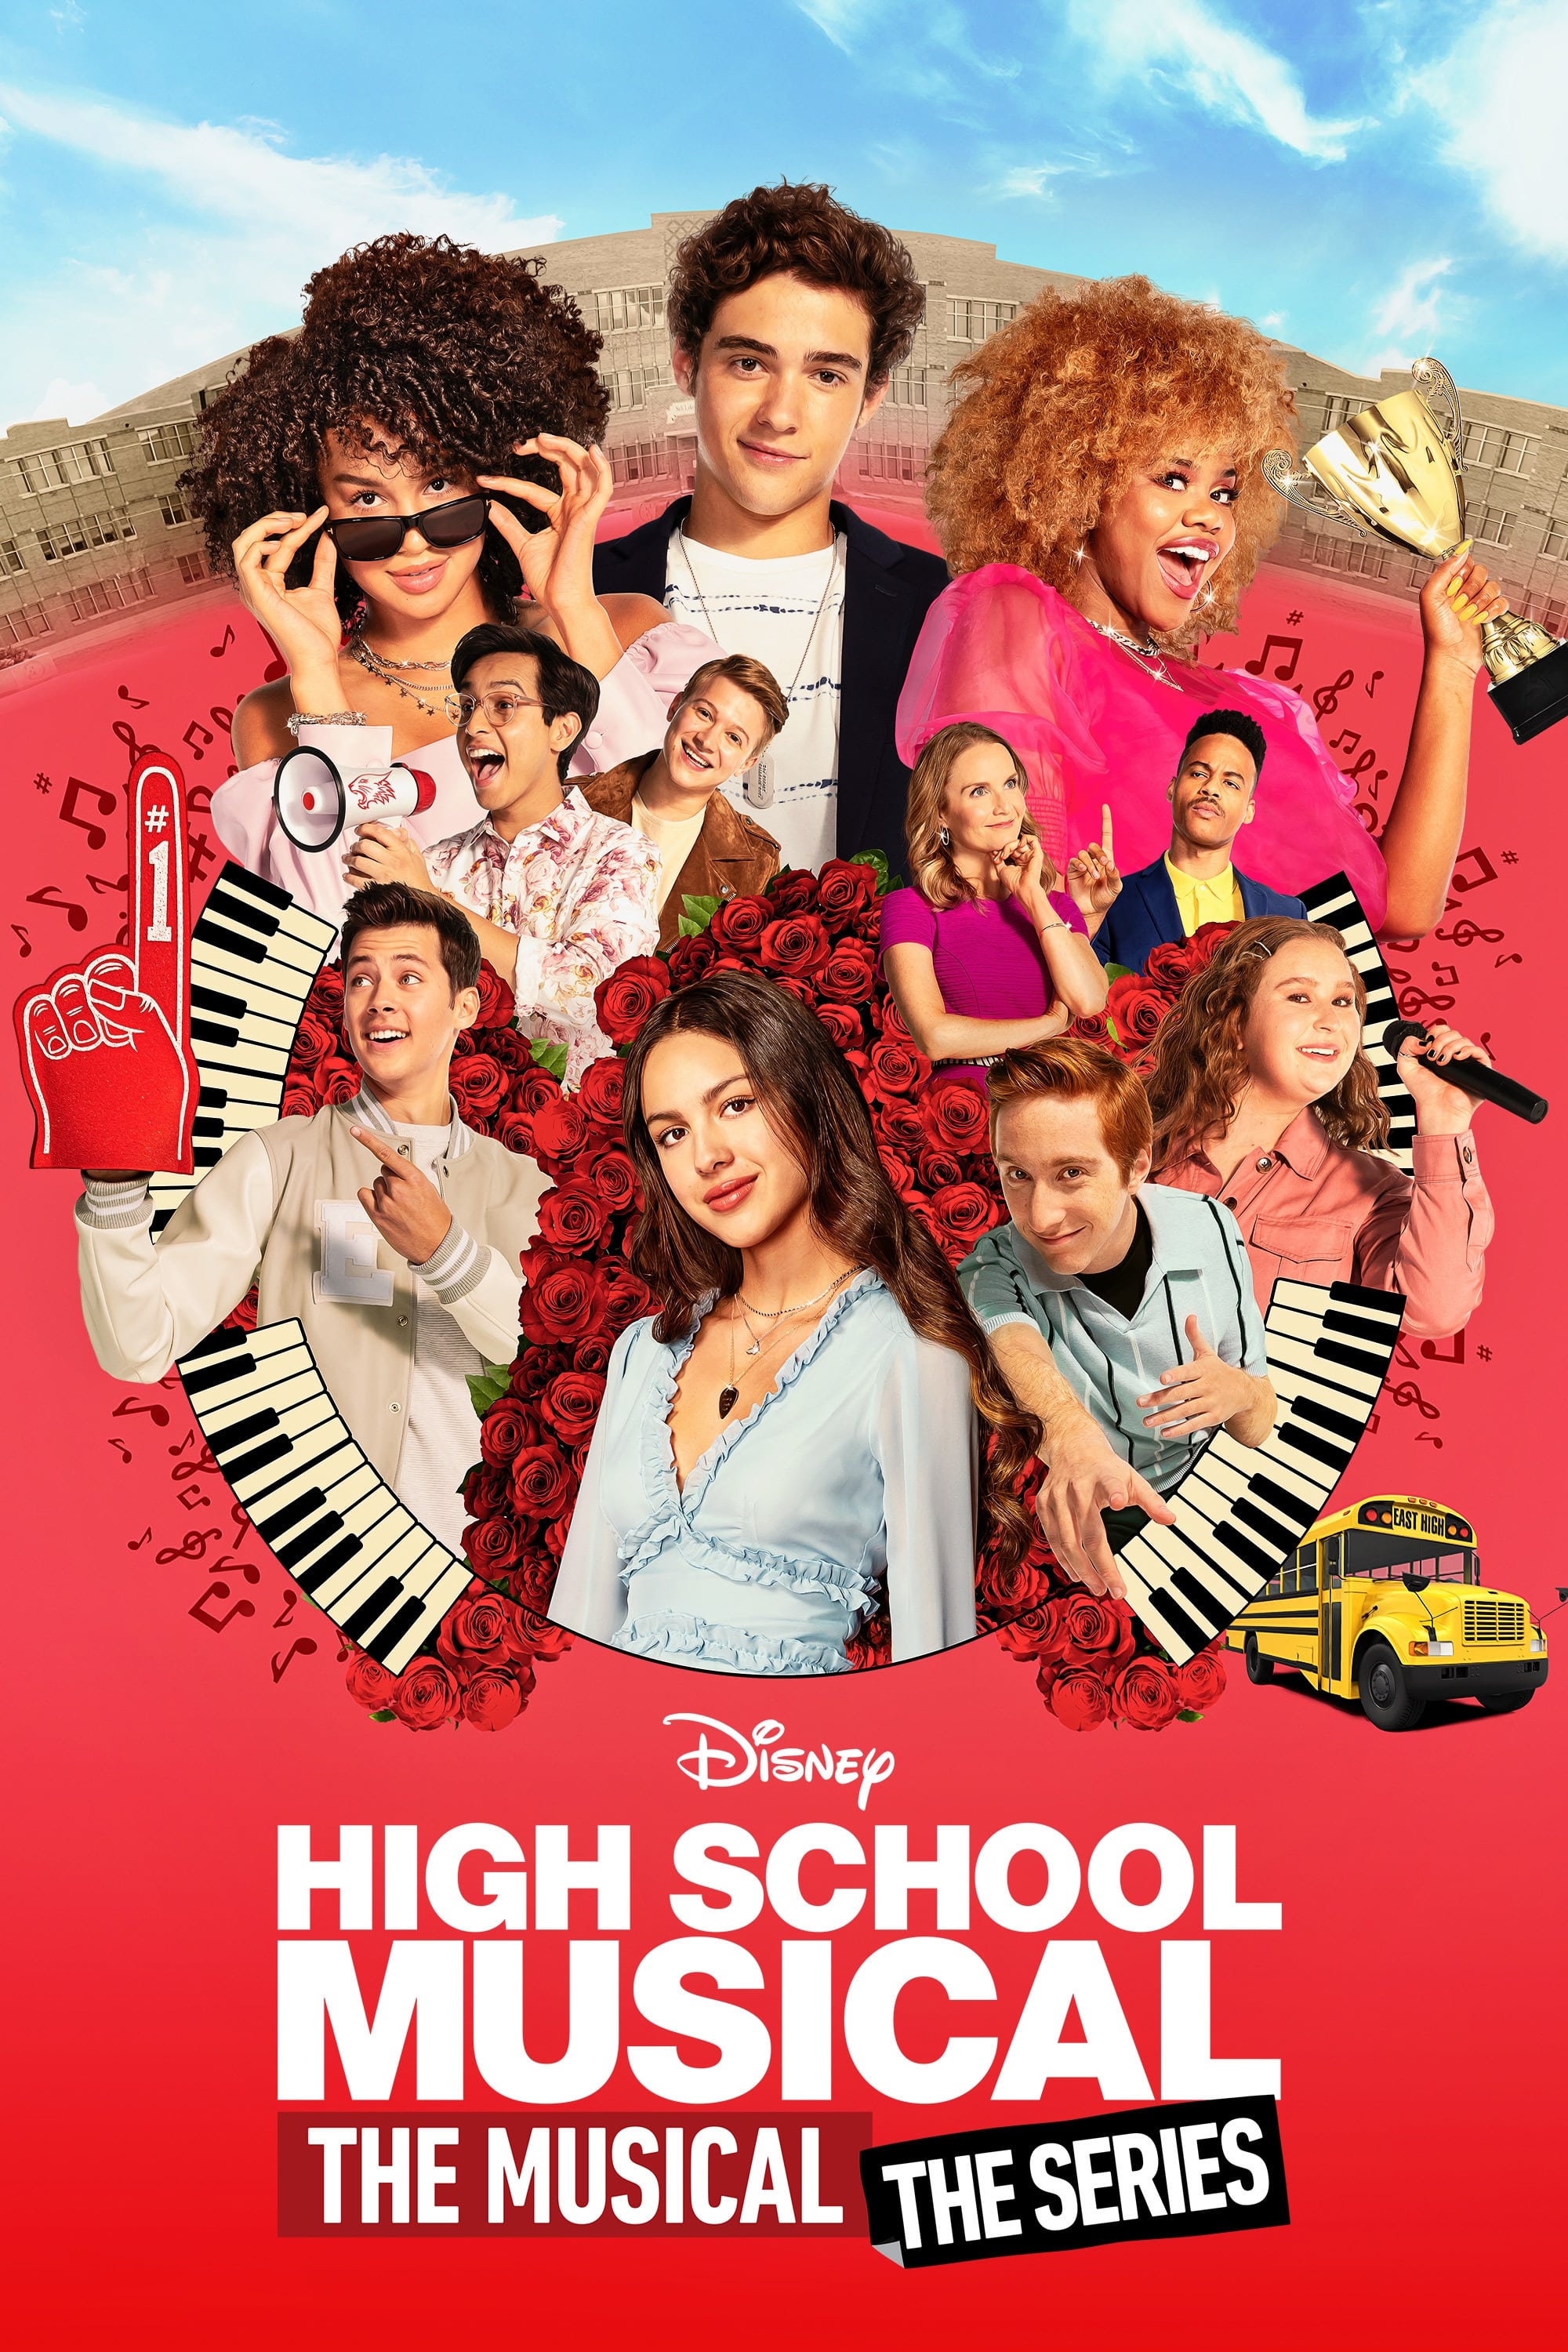 High School Musical: The Musical: The Series TV Shows About Based On Movie